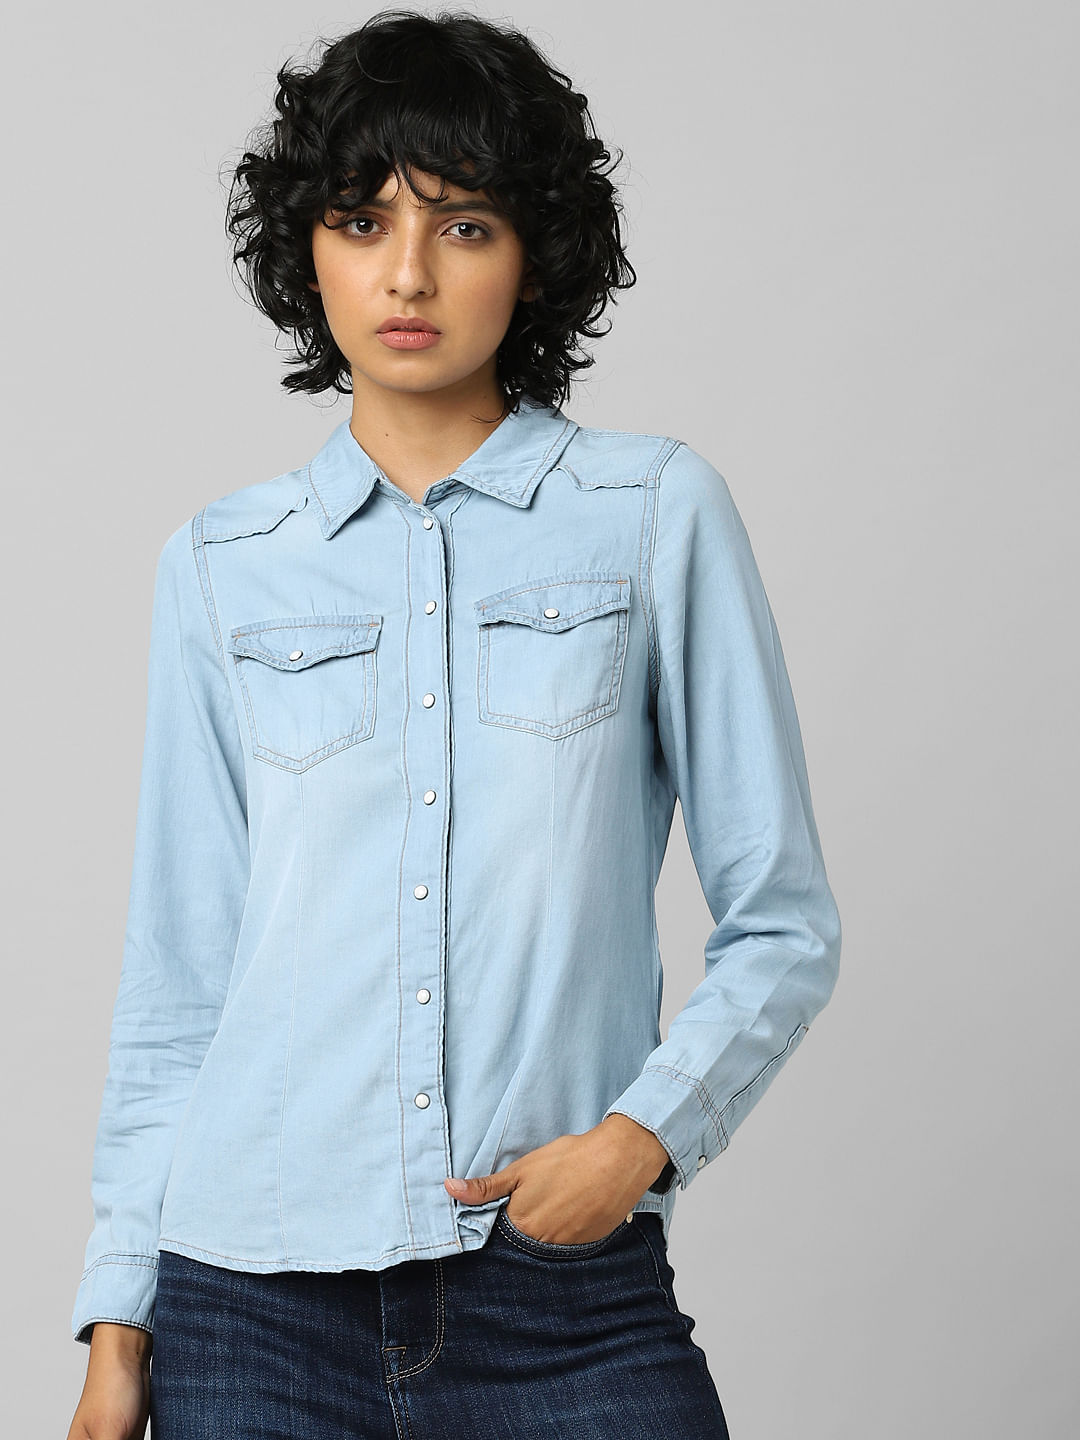 Buy Blue Shirts for Men by ALTHEORY Online | Ajio.com